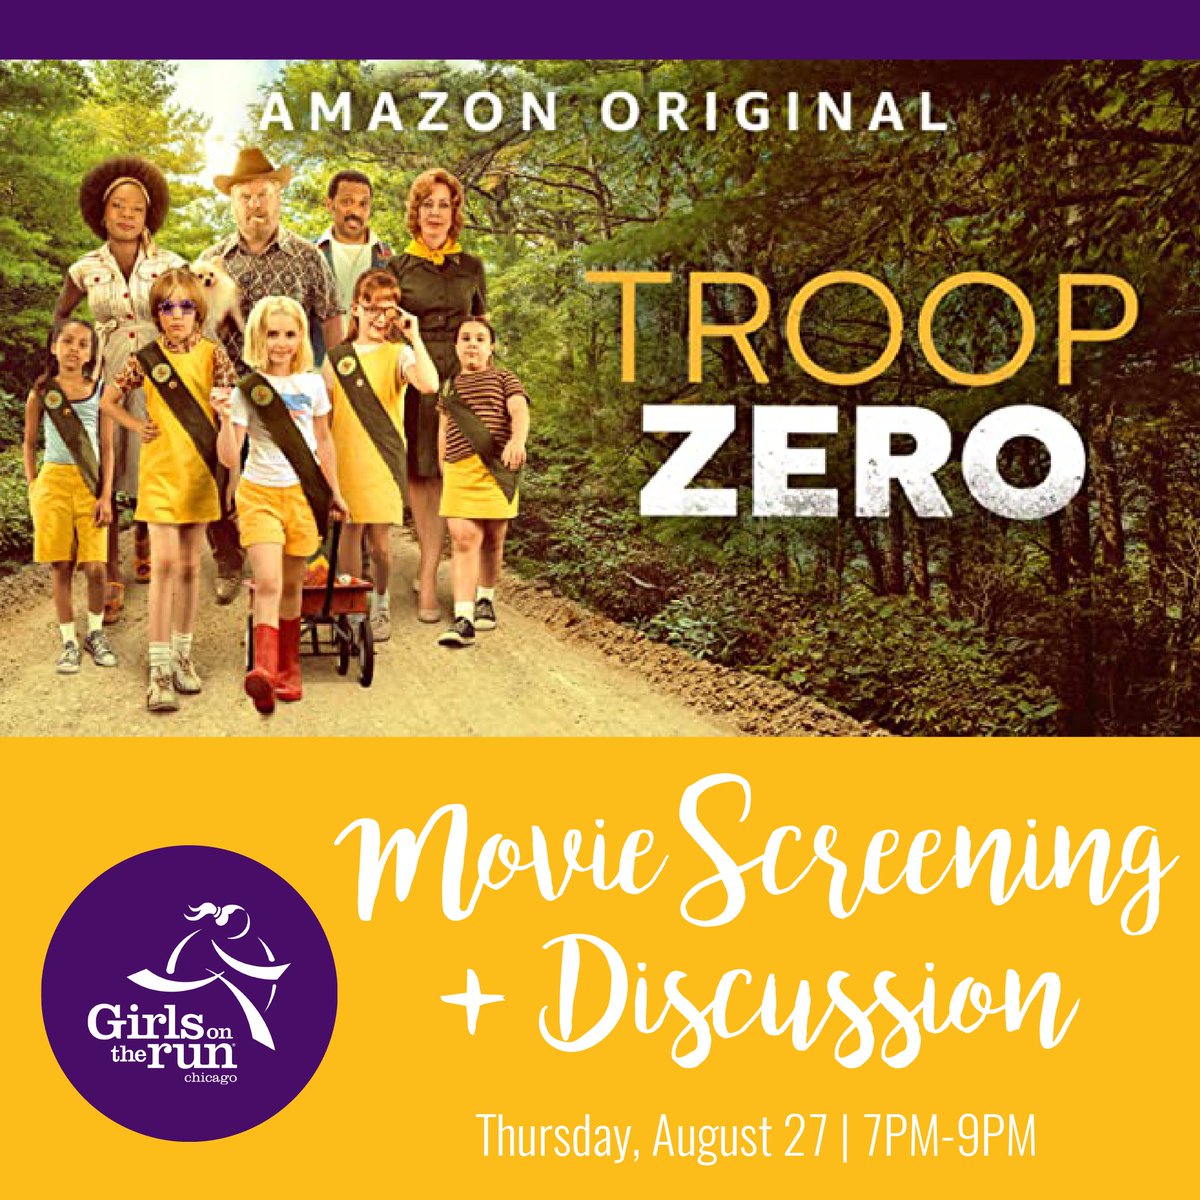 Last call to join our movie night, tonight!! We're watching Troop Zero, a movie about being proud of who you are. There's still time to register using the link below. Once you register, you'll get a link to the movie night in your inbox! See you there! docs.google.com/forms/d/e/1FAI…